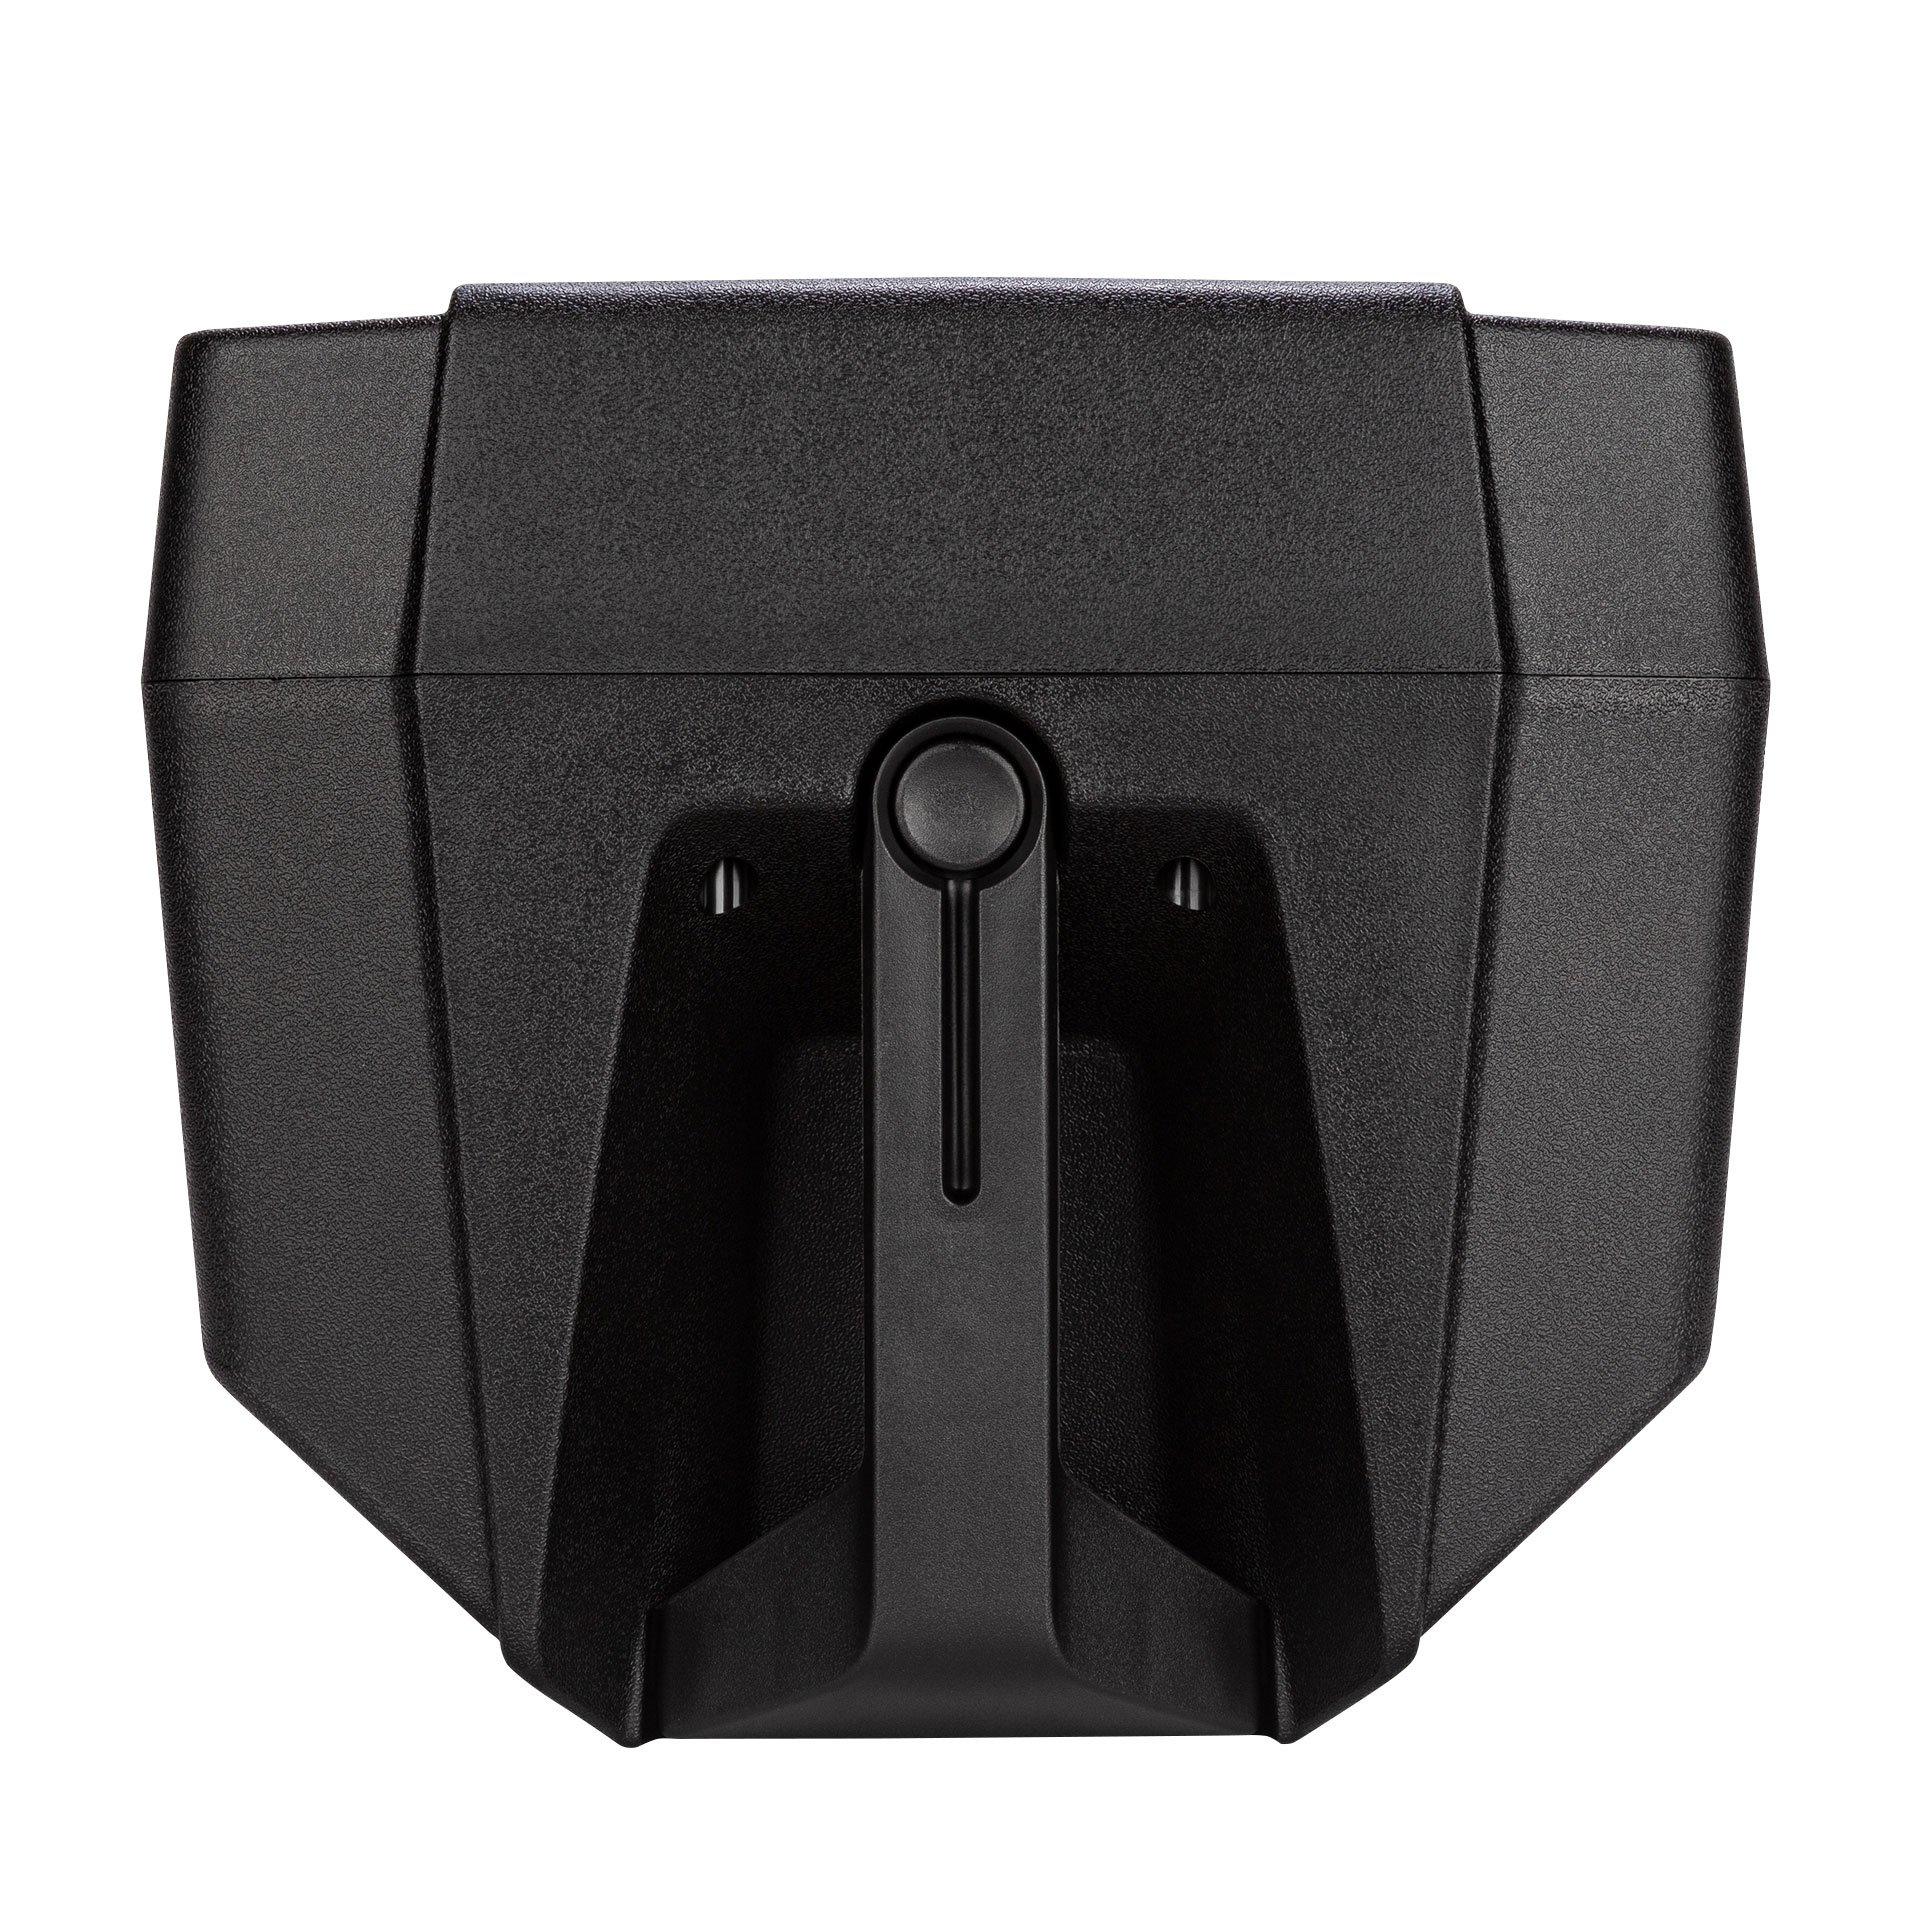 RCF Art 710-A MK4 Active Two Way Speaker top